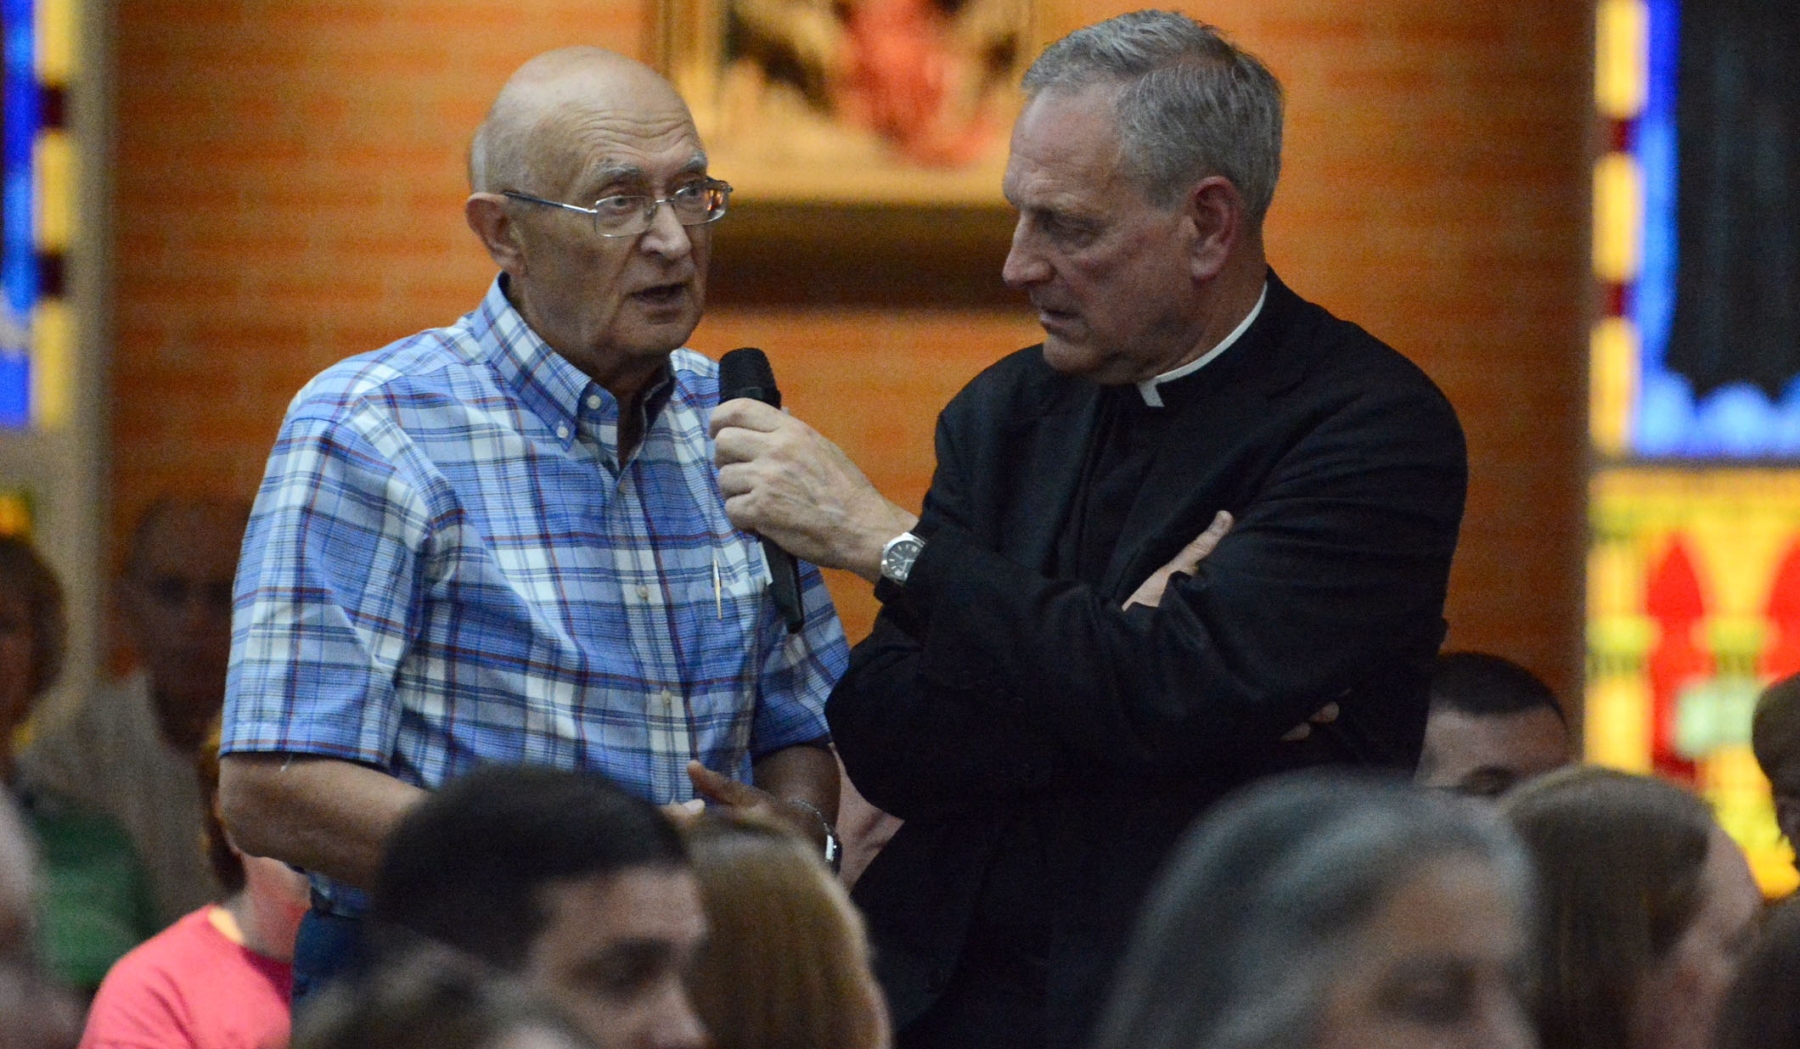 Rimas Slavickas (left) asks a question to the panelists at St. Leo the Great Parish, where Msgr. Robert Zapfel (right) served as moderator of a discussion titled 'Let's Talk About...The Future of the Catholic Church.` (Patrick McPartland/Managing Editor)